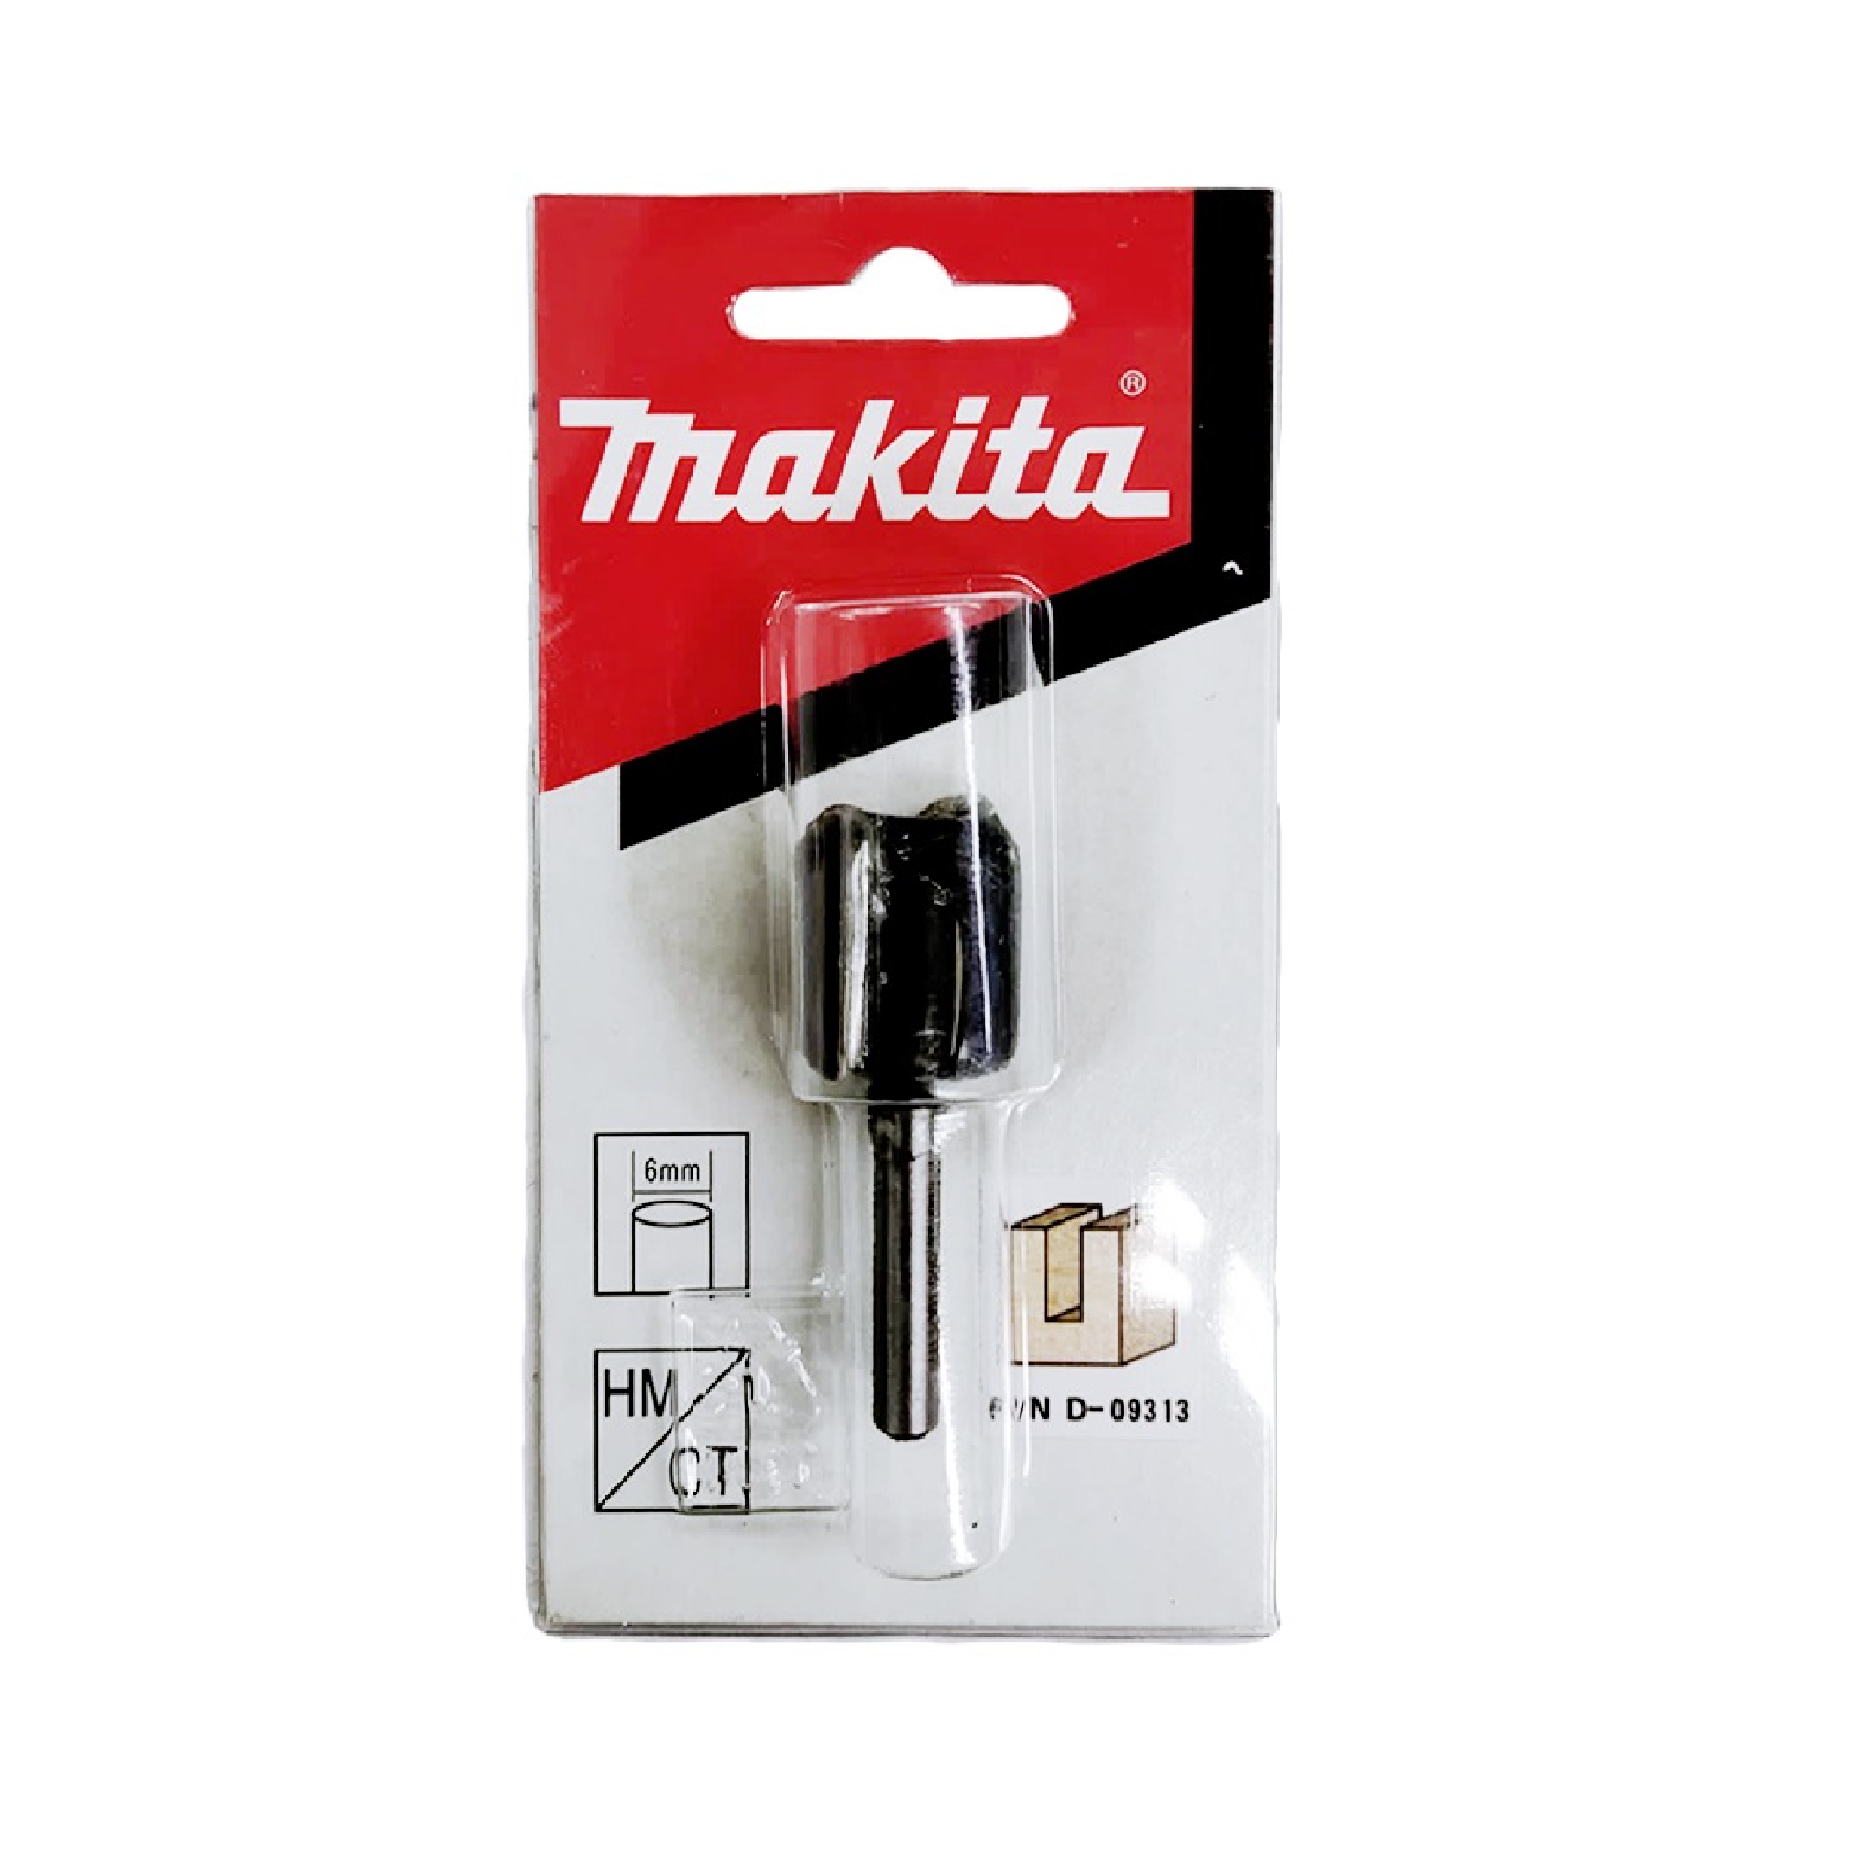 Makita D-09313 STRAIGHT END MILL With 2 Edges 6MM TRIMMING Router Bit